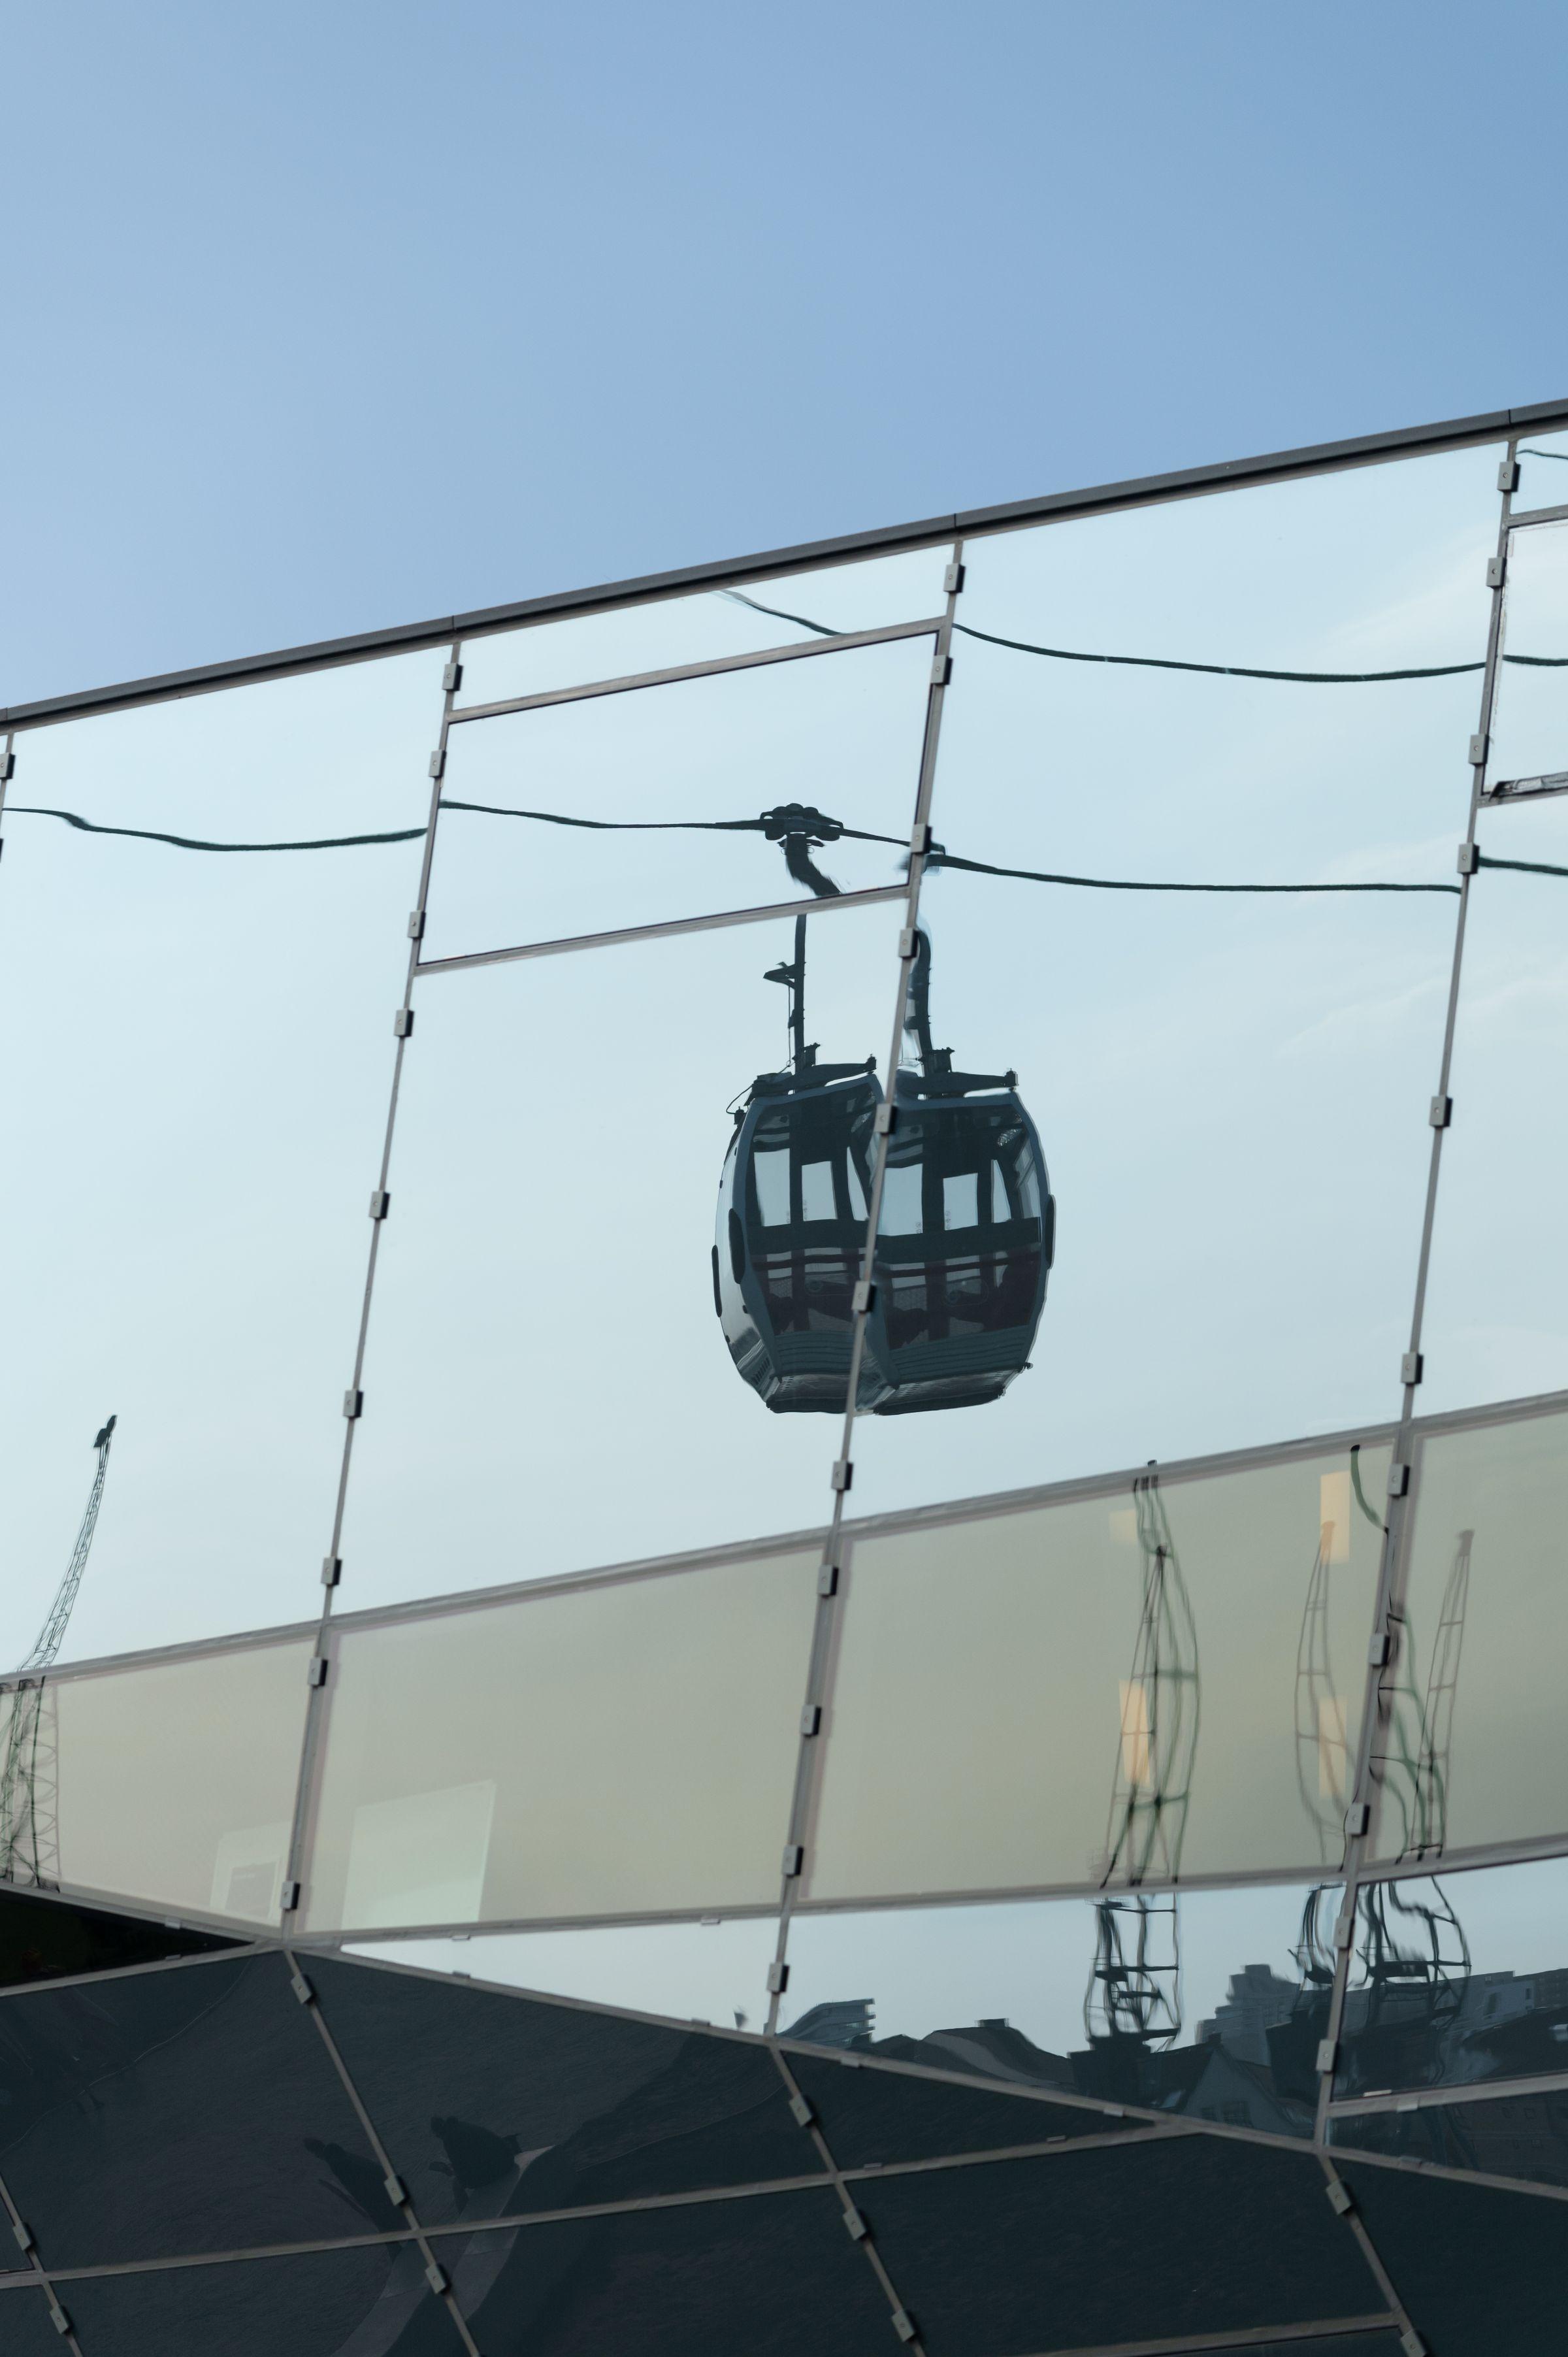 Emirates Airline Cable Car reflection